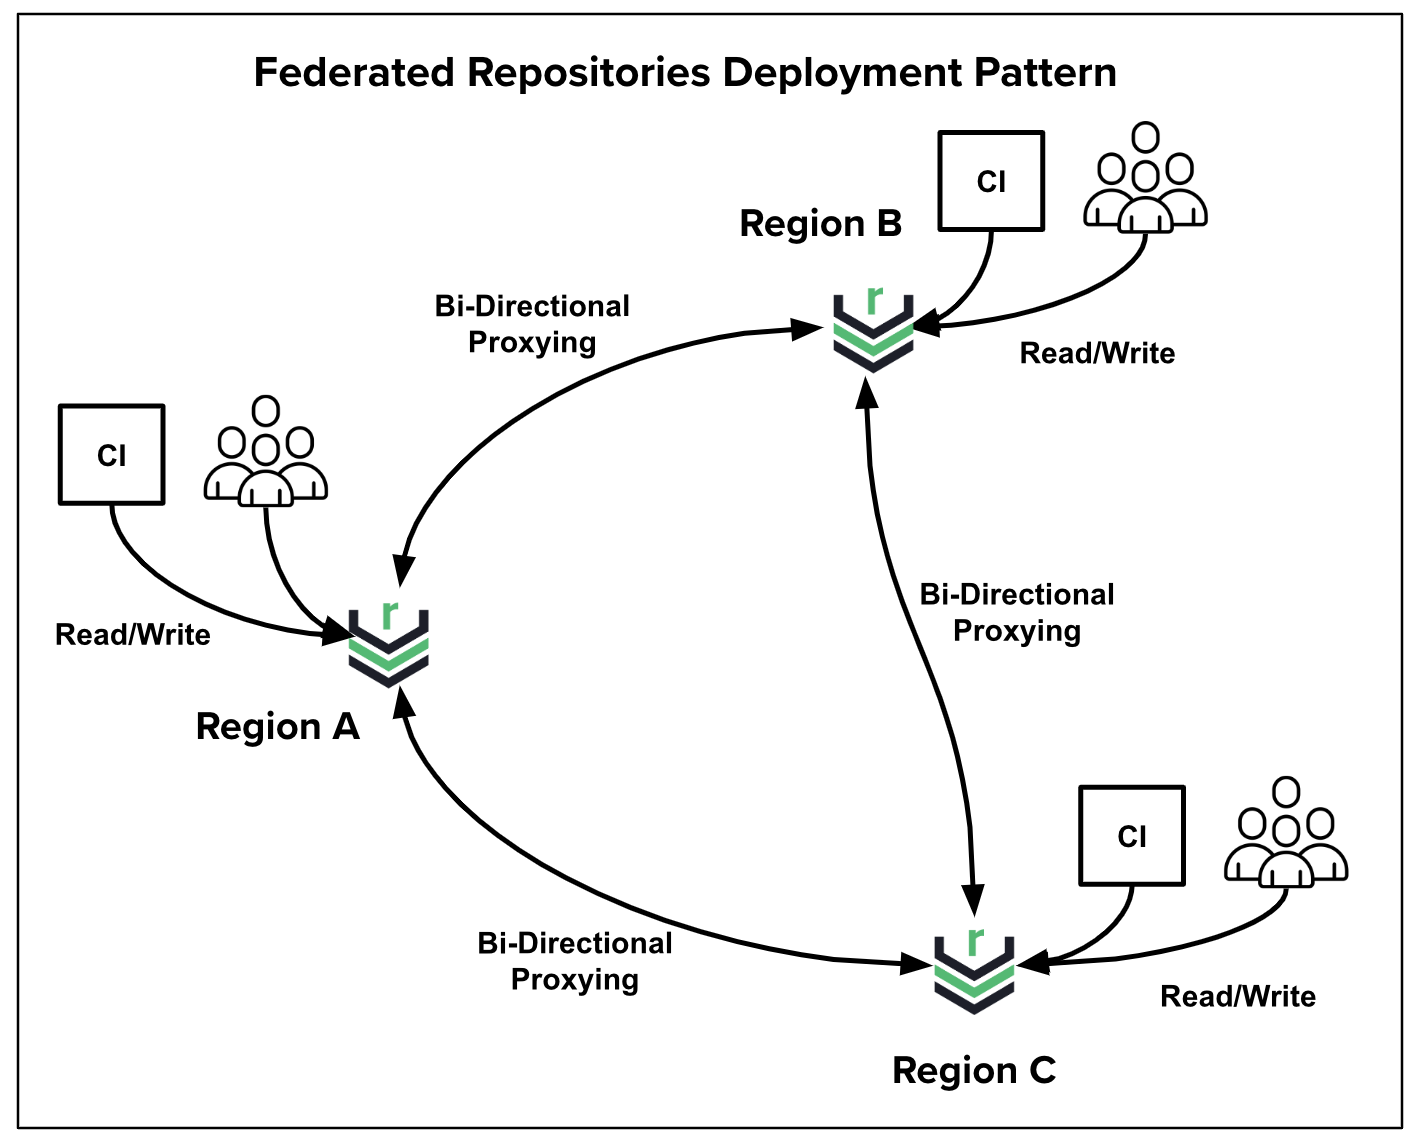 Federated repositories pattern